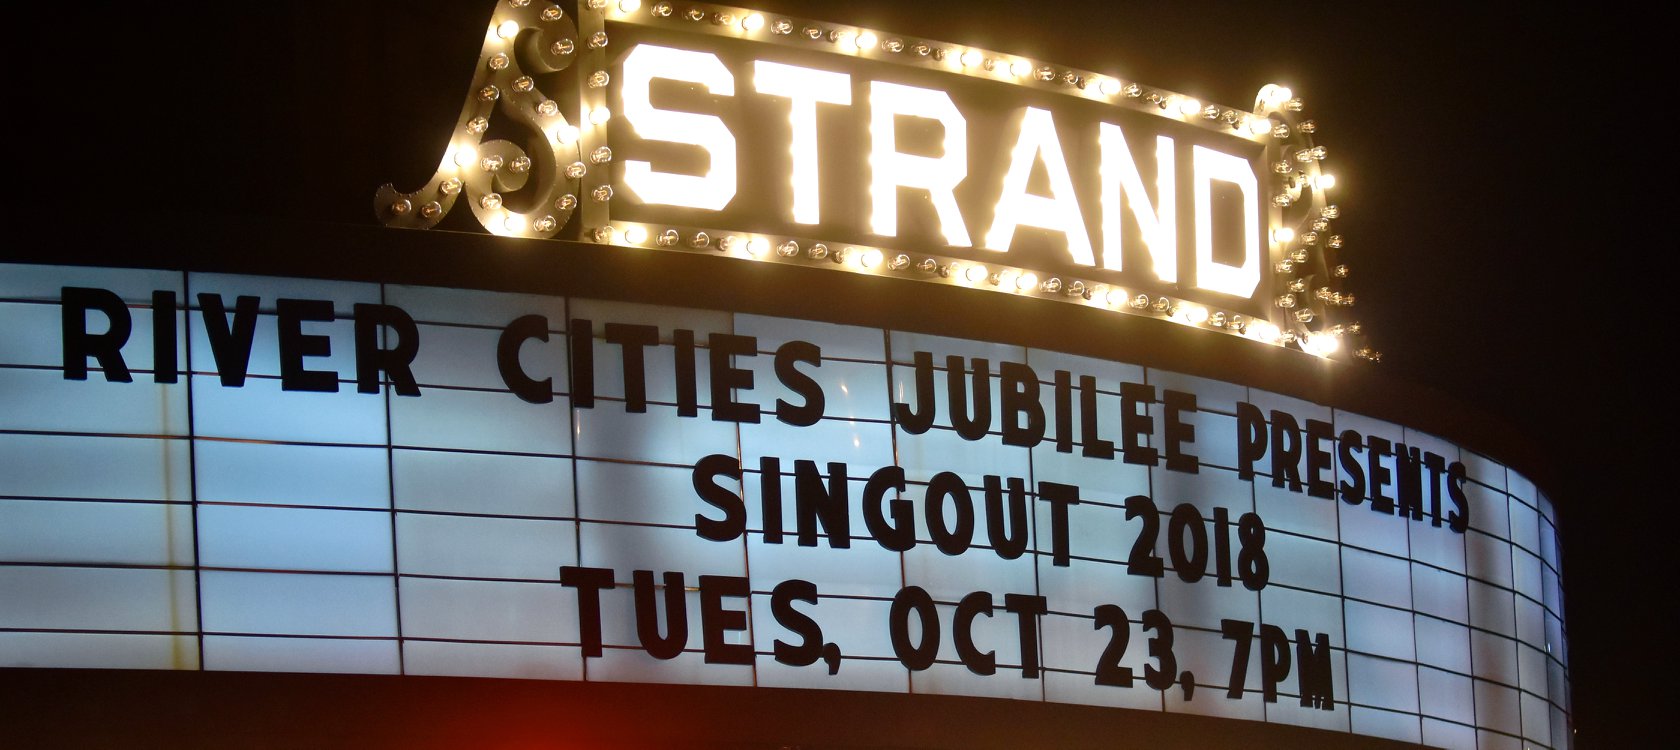 Text on marquee: “RIVER CITIES JUBILEE PRESENTS: • SINGOUT 2018 • TUES, OCT 23, 7PM”